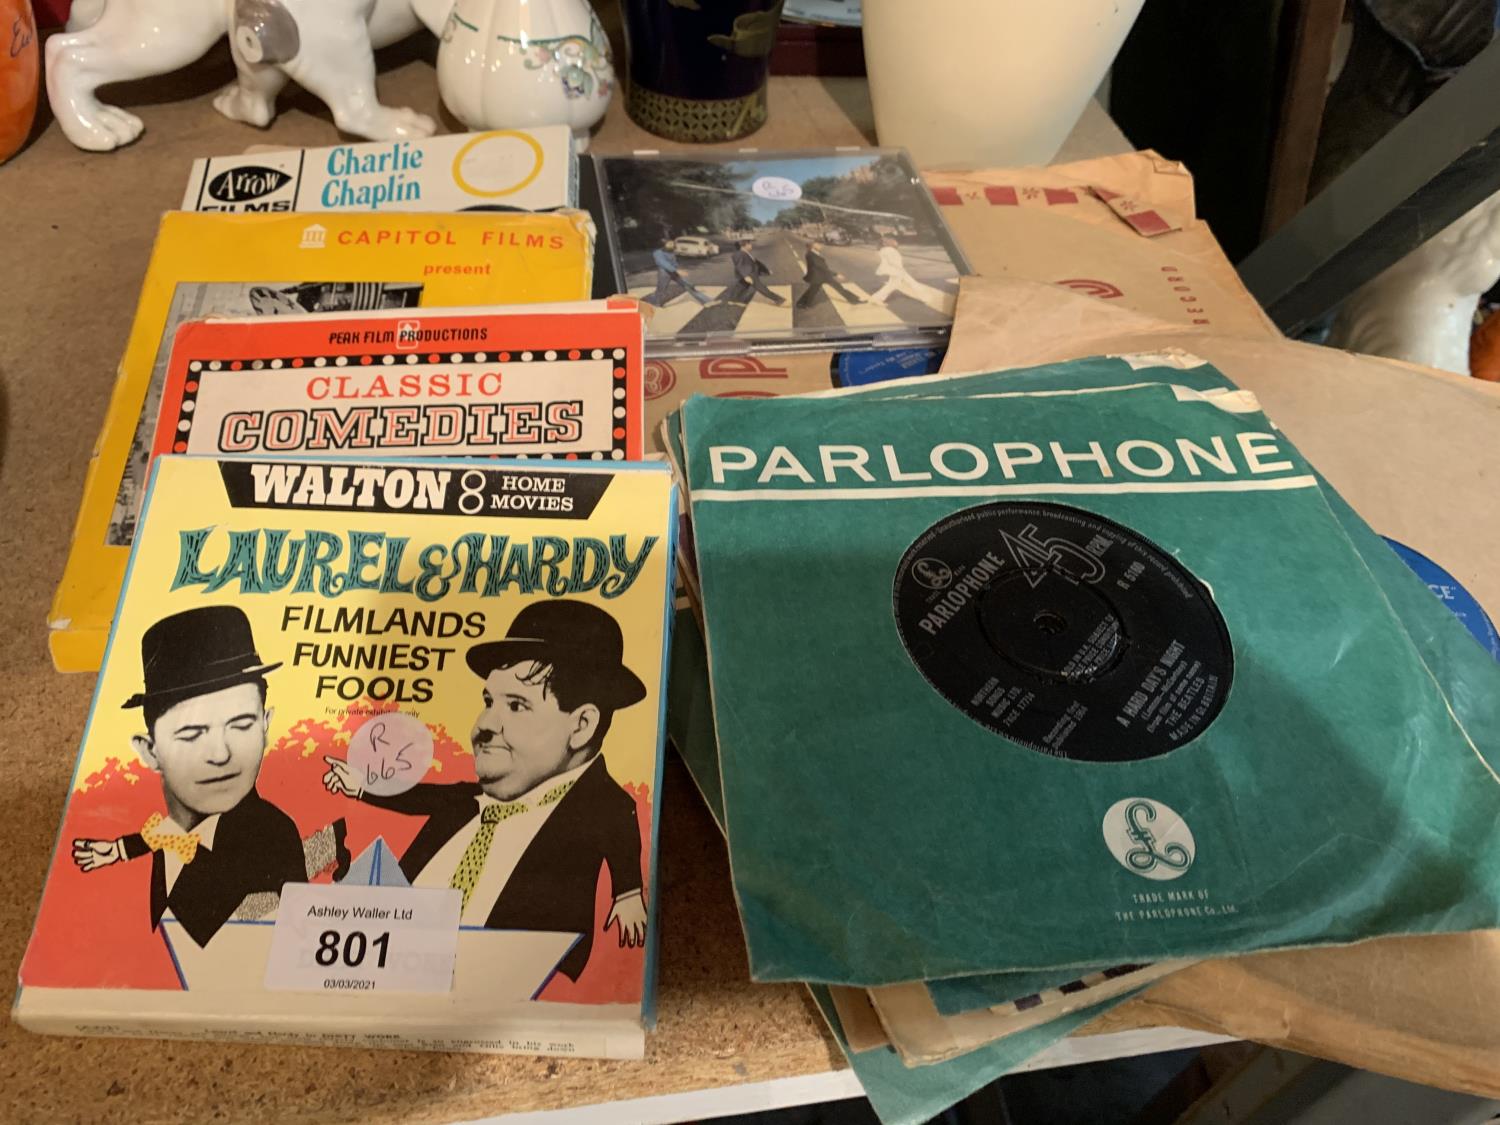 A QUANTITY OF BEATLES SINGLES, ELVIS 78'S AND 8 MM FILMS TO INCLUDE LAUREL AND HARDY